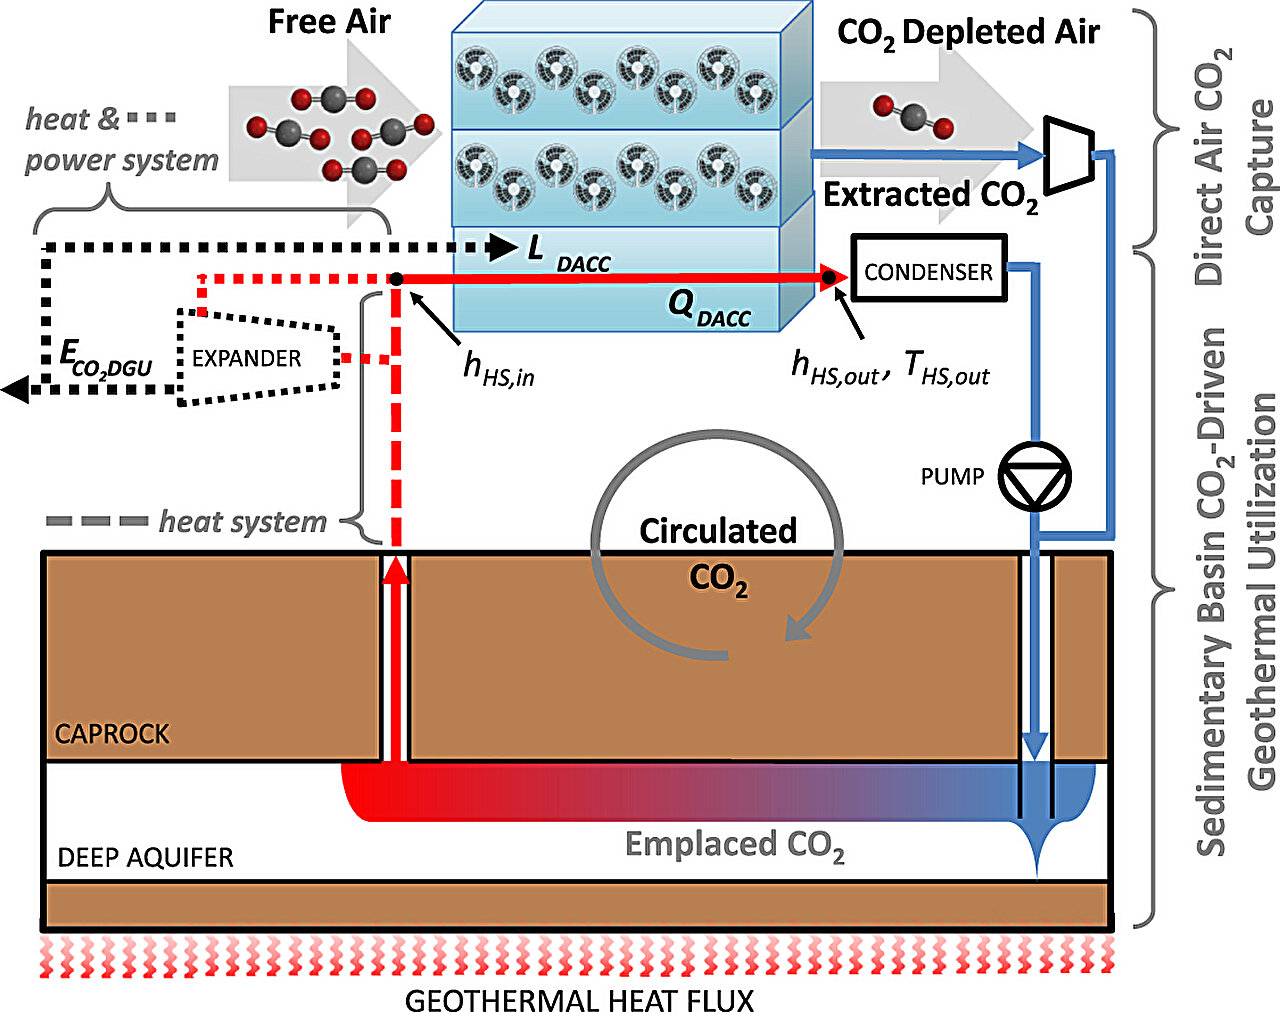 #A geothermal-powered, climate-friendly way to capture carbon dioxide in the air